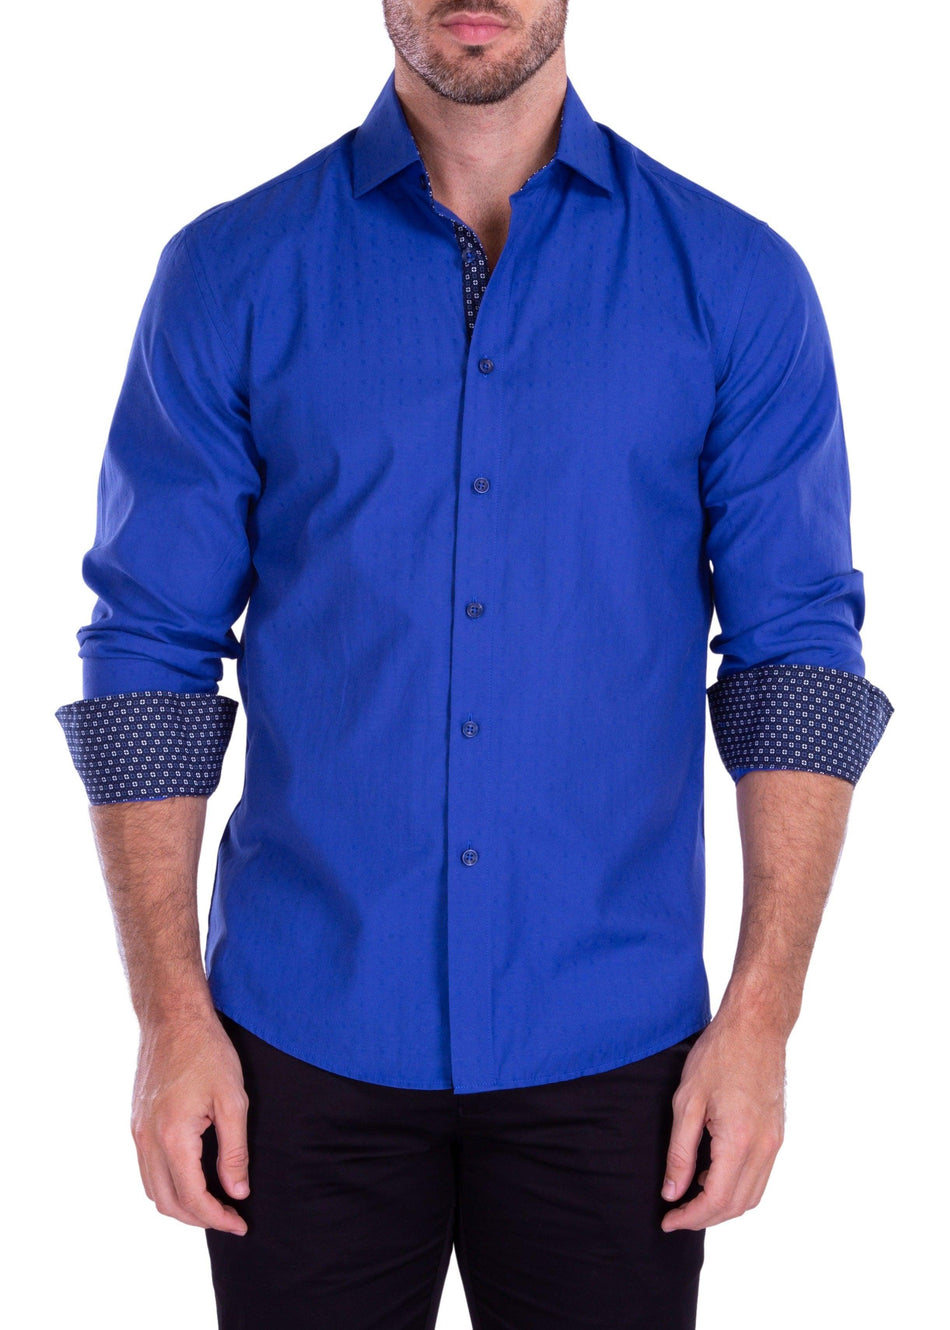 Dotted Texture Long Sleeve Dress Shirt Solid Royal Blue